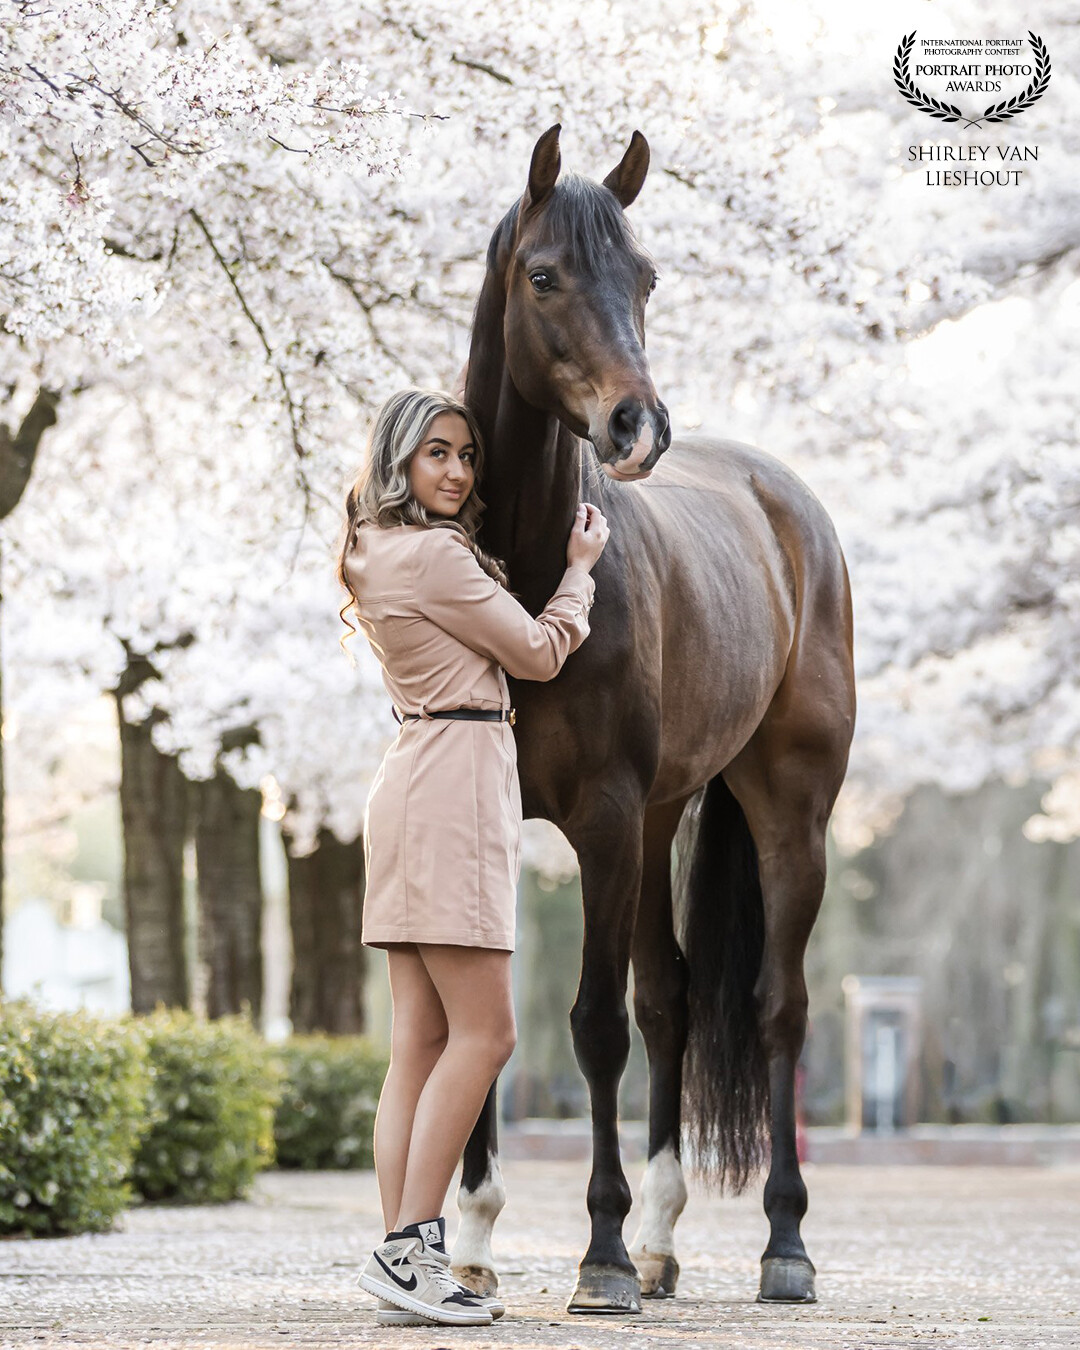 I love the Spring season with it's blossoming trees. This is Sterre with her gorgeous horse 'Let's Dance' , aren't they looking so pretty together?